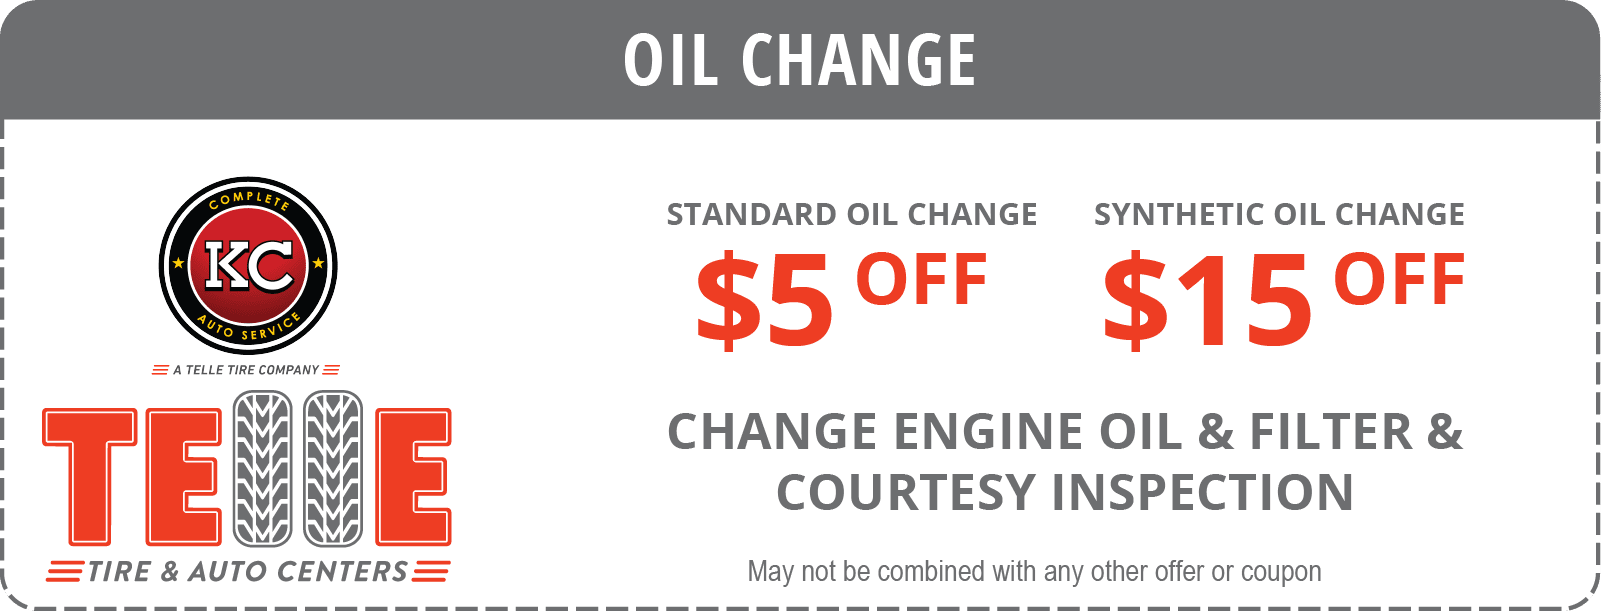 Telle Tire Oil Change coupon. $5 off standard oil change or $15 off synthetic oil change. Change engine oil and filter and courtesy inspection. May not be combined with any other offer or coupon.